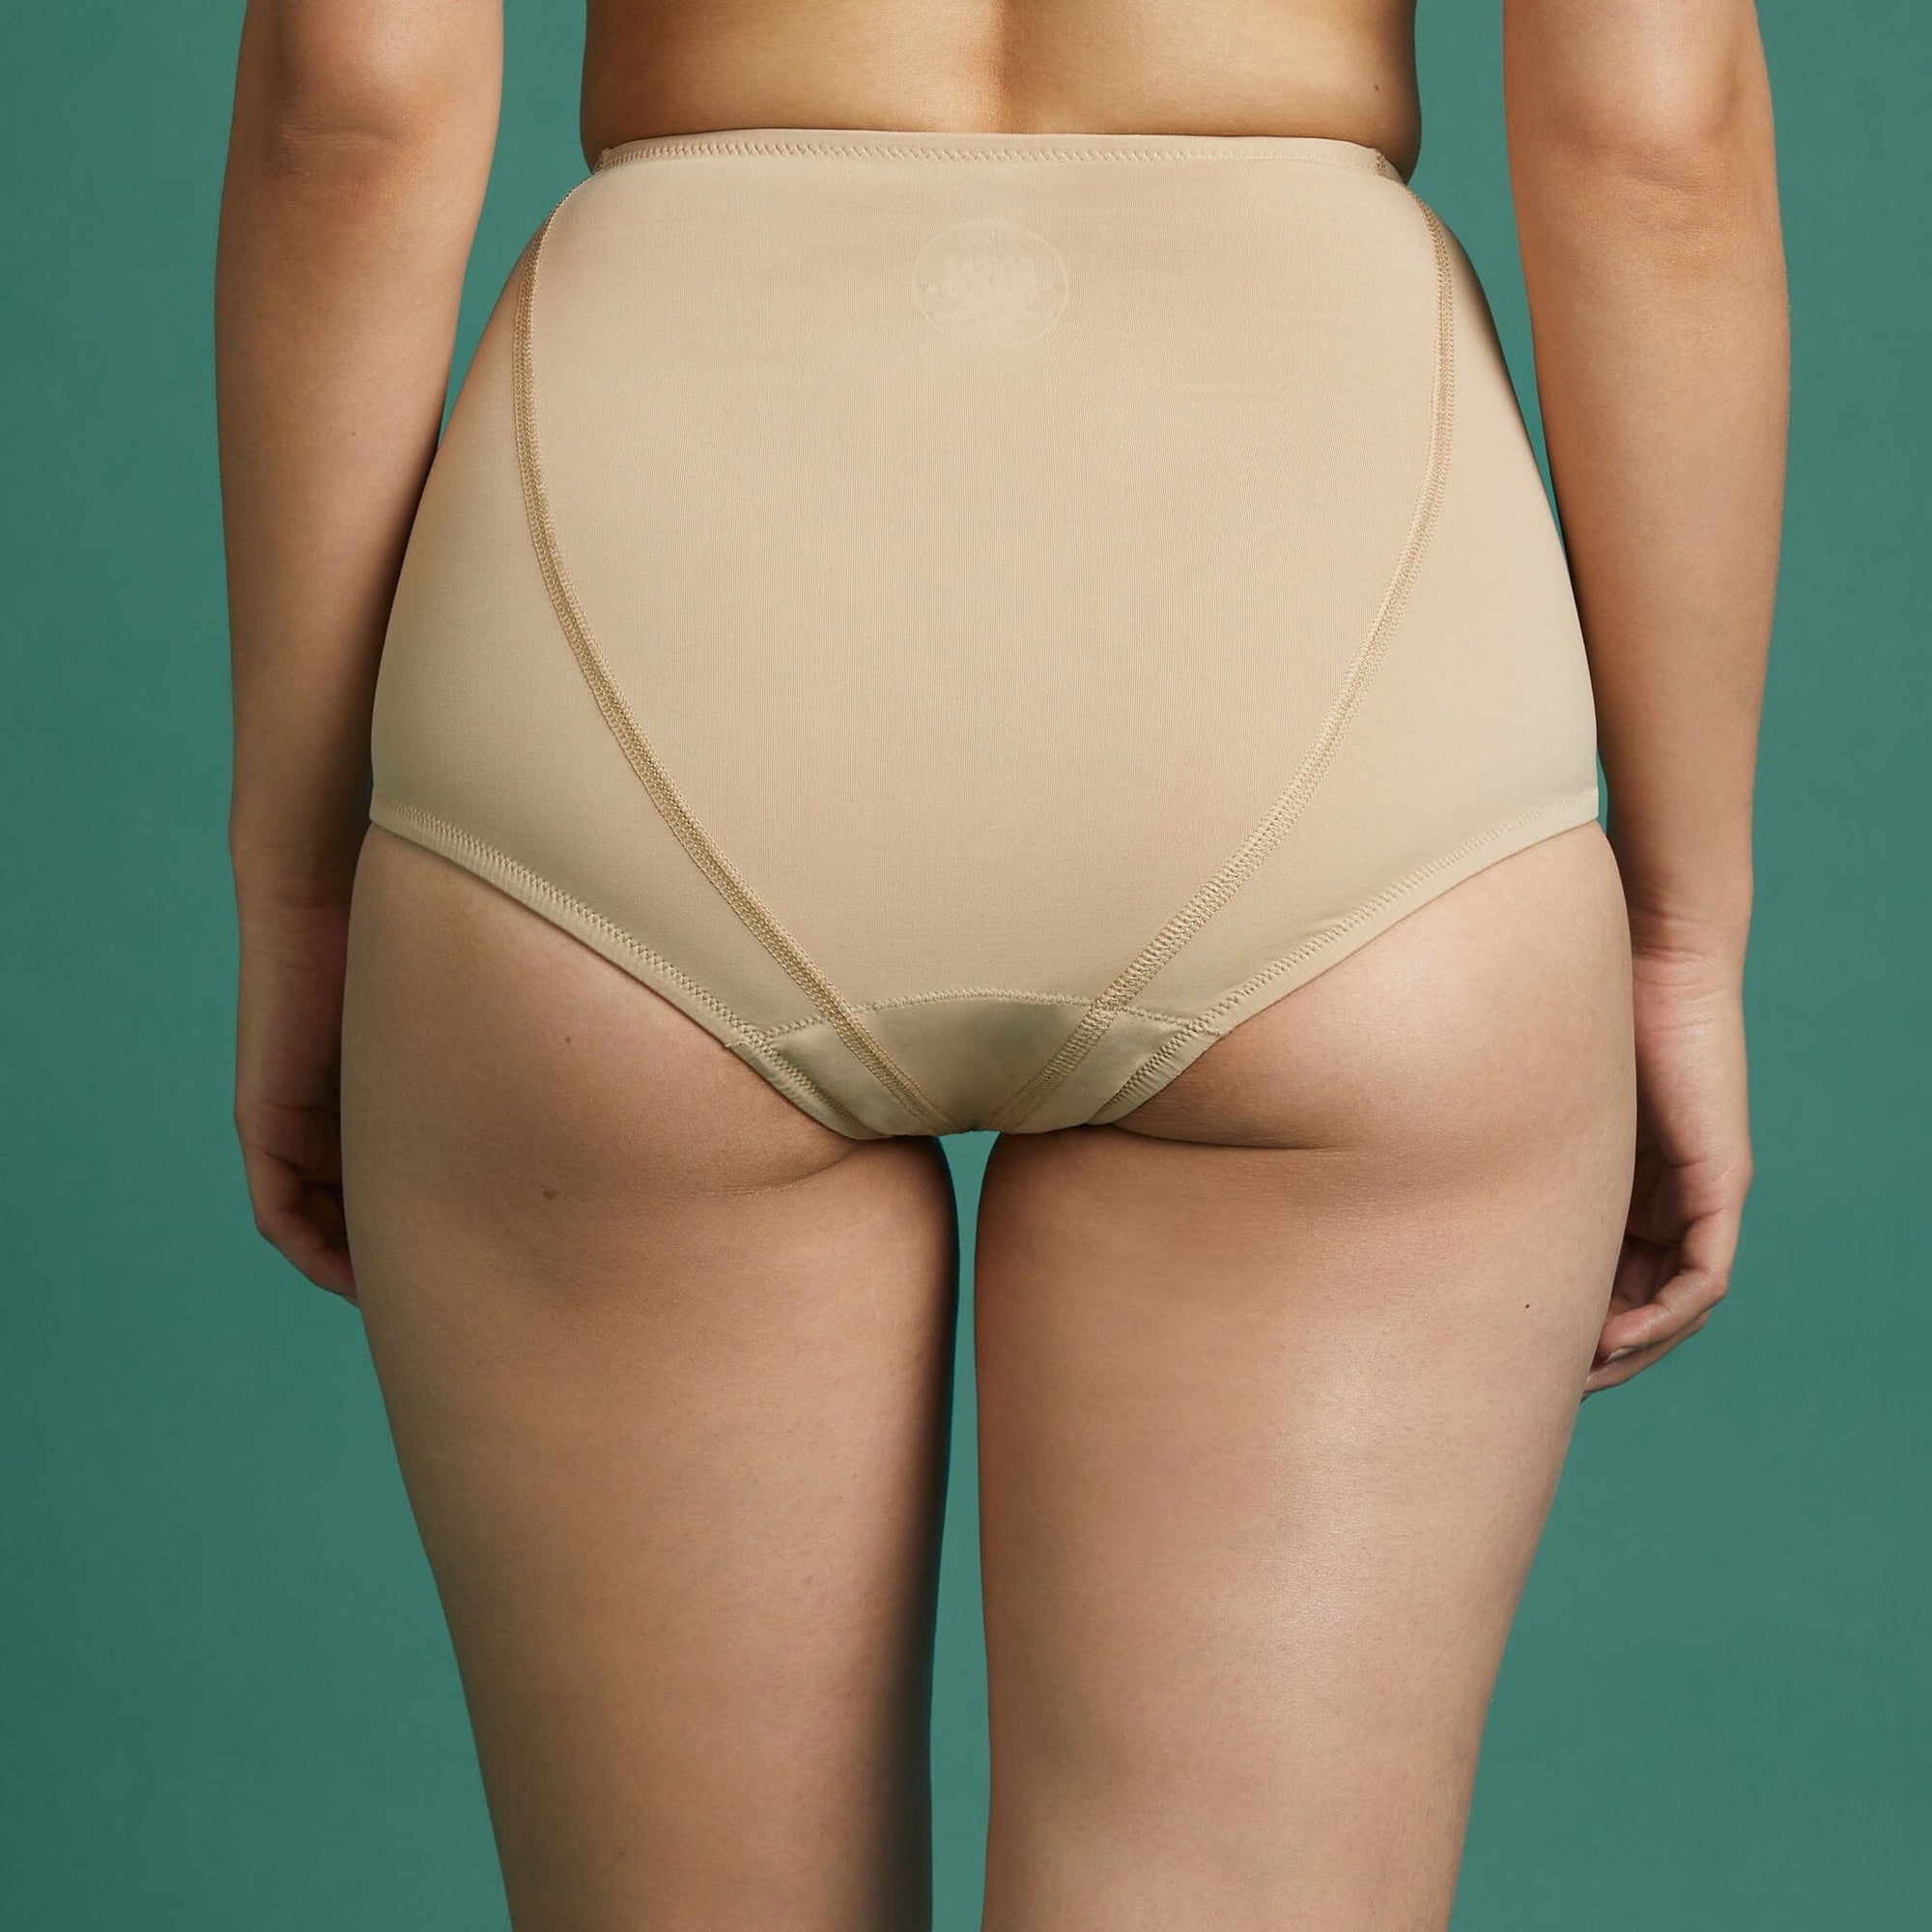 Leakproof Underwear with Velcro closure. Shown in black, back view.